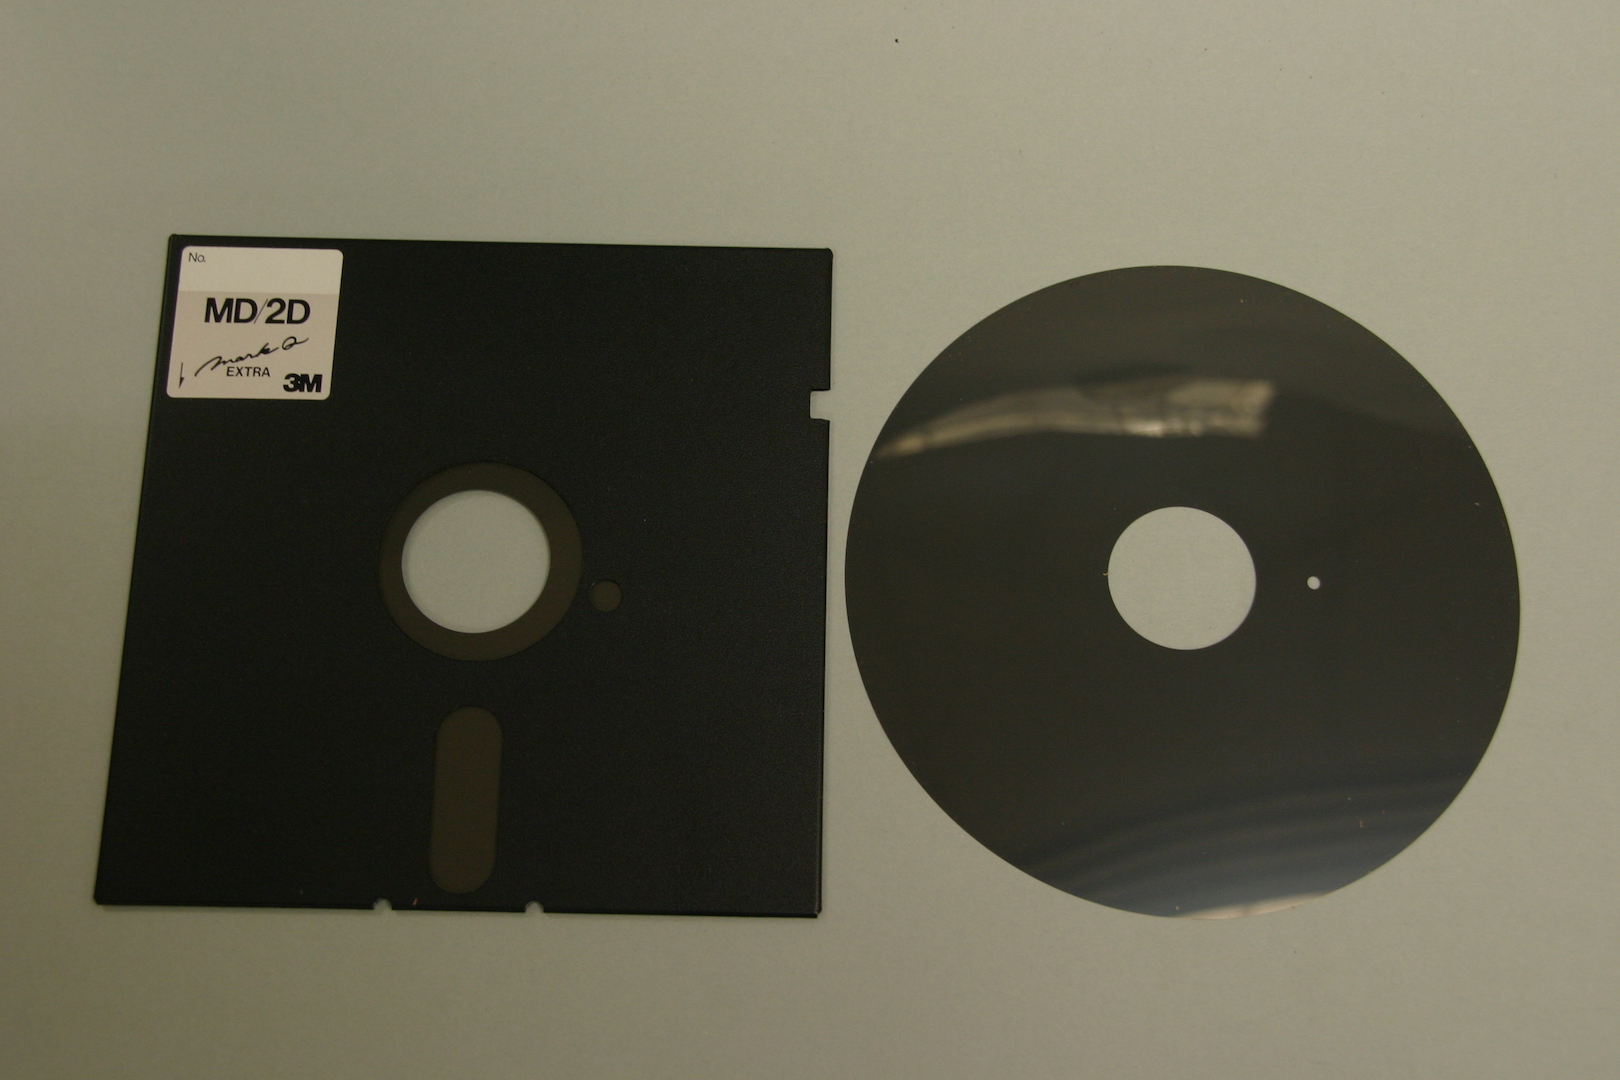 what happens to floppy disk when it formatted